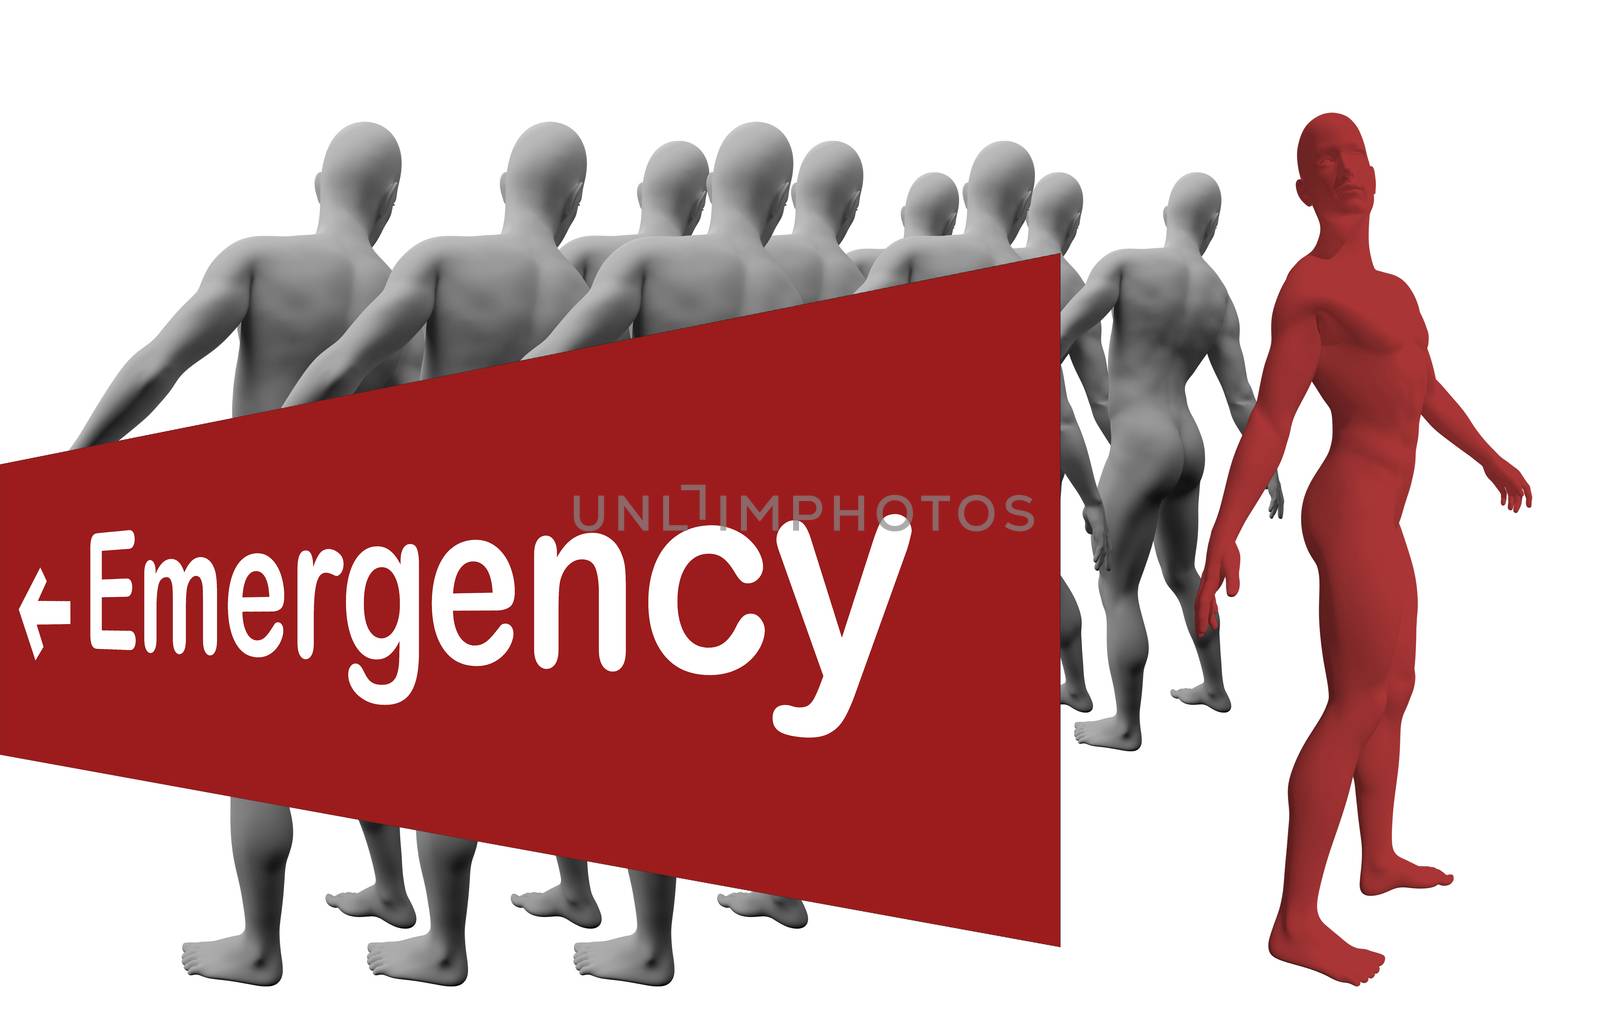 Standing Out From The Crowd with text emergensy made in 3d software